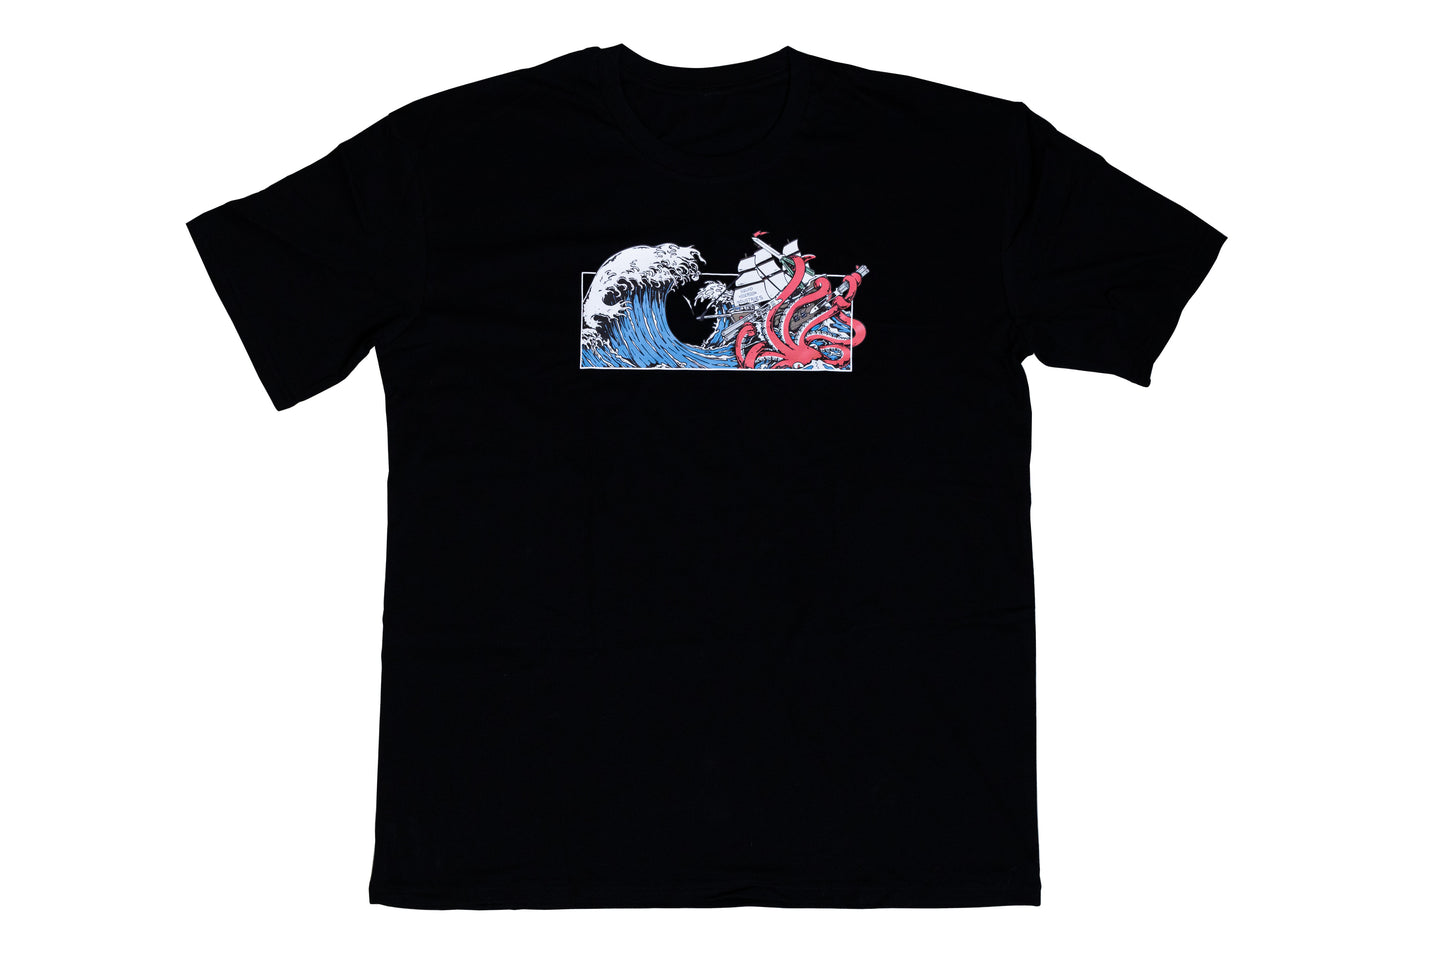 Squid Industries x Simple Stock Collaboration Black T-shirt featuring a Kraken in Tsunami waves holding on the Squid Industries balisongs